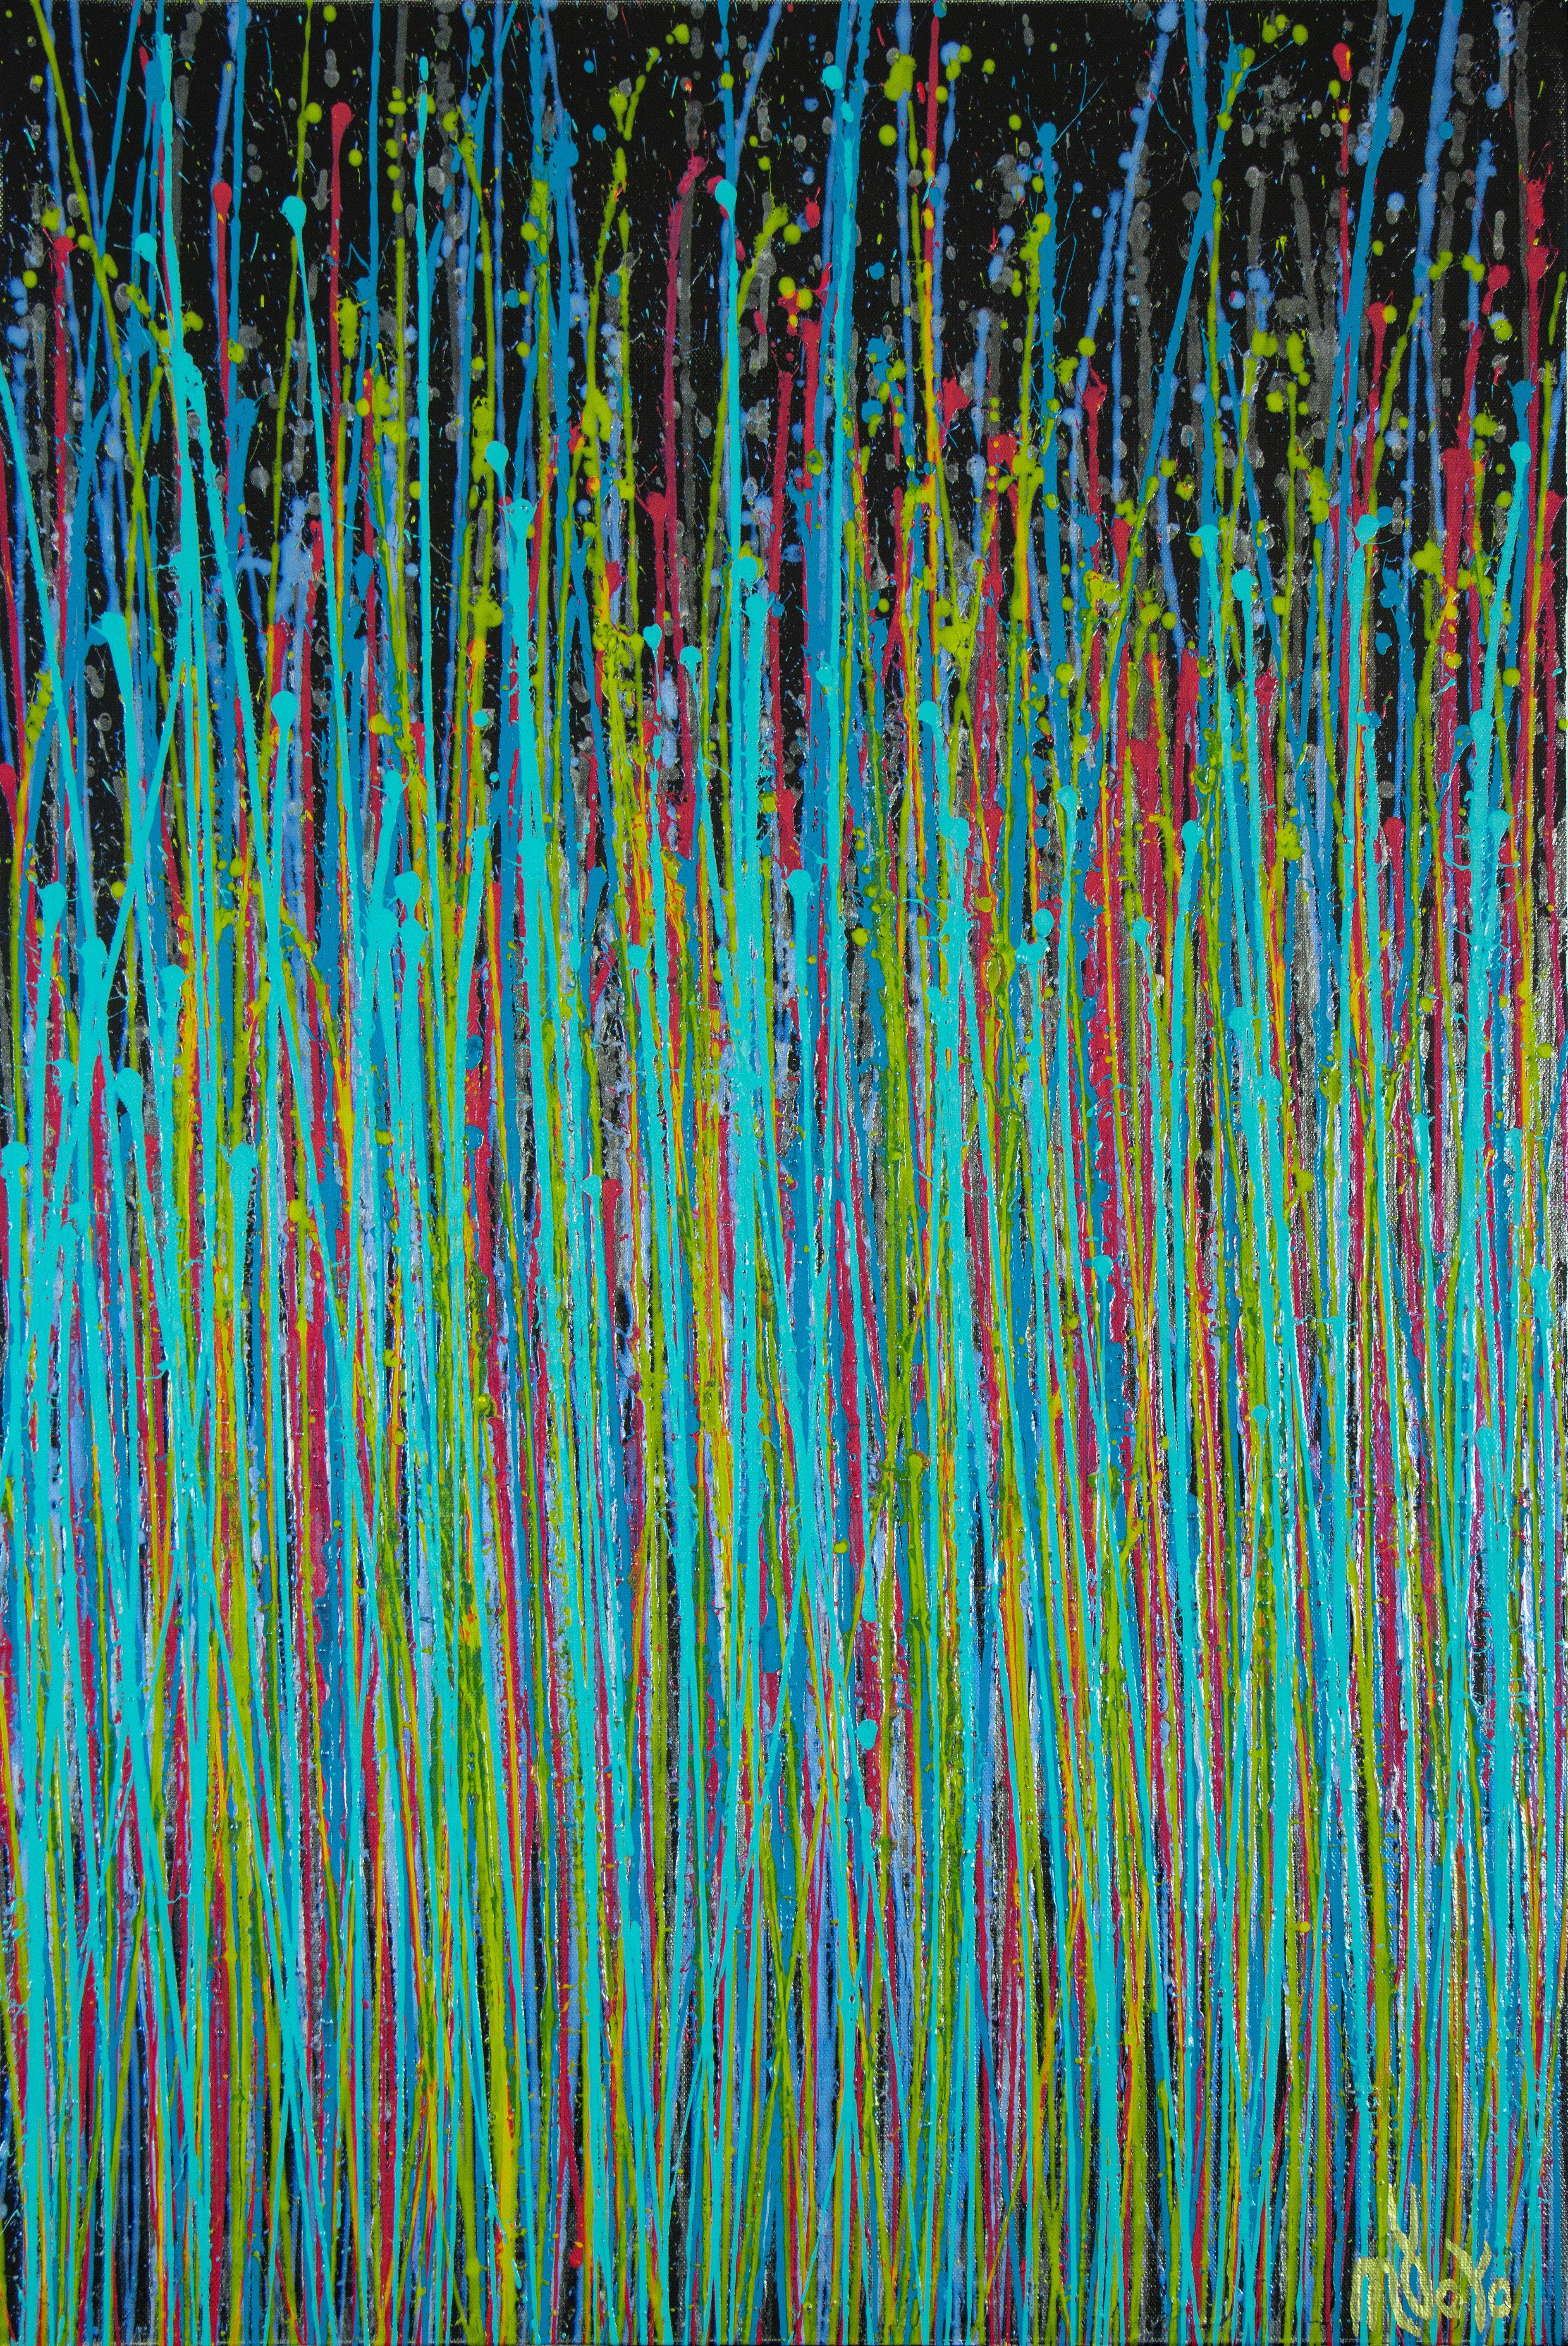 Expressive modern abstract, bold full of life, gloss and shimmer! inspired by nature. Shades of iridescent blue, yellow, red, teal over black background. signed in front.    I include a certificate of authenticity that lists the materials as well as